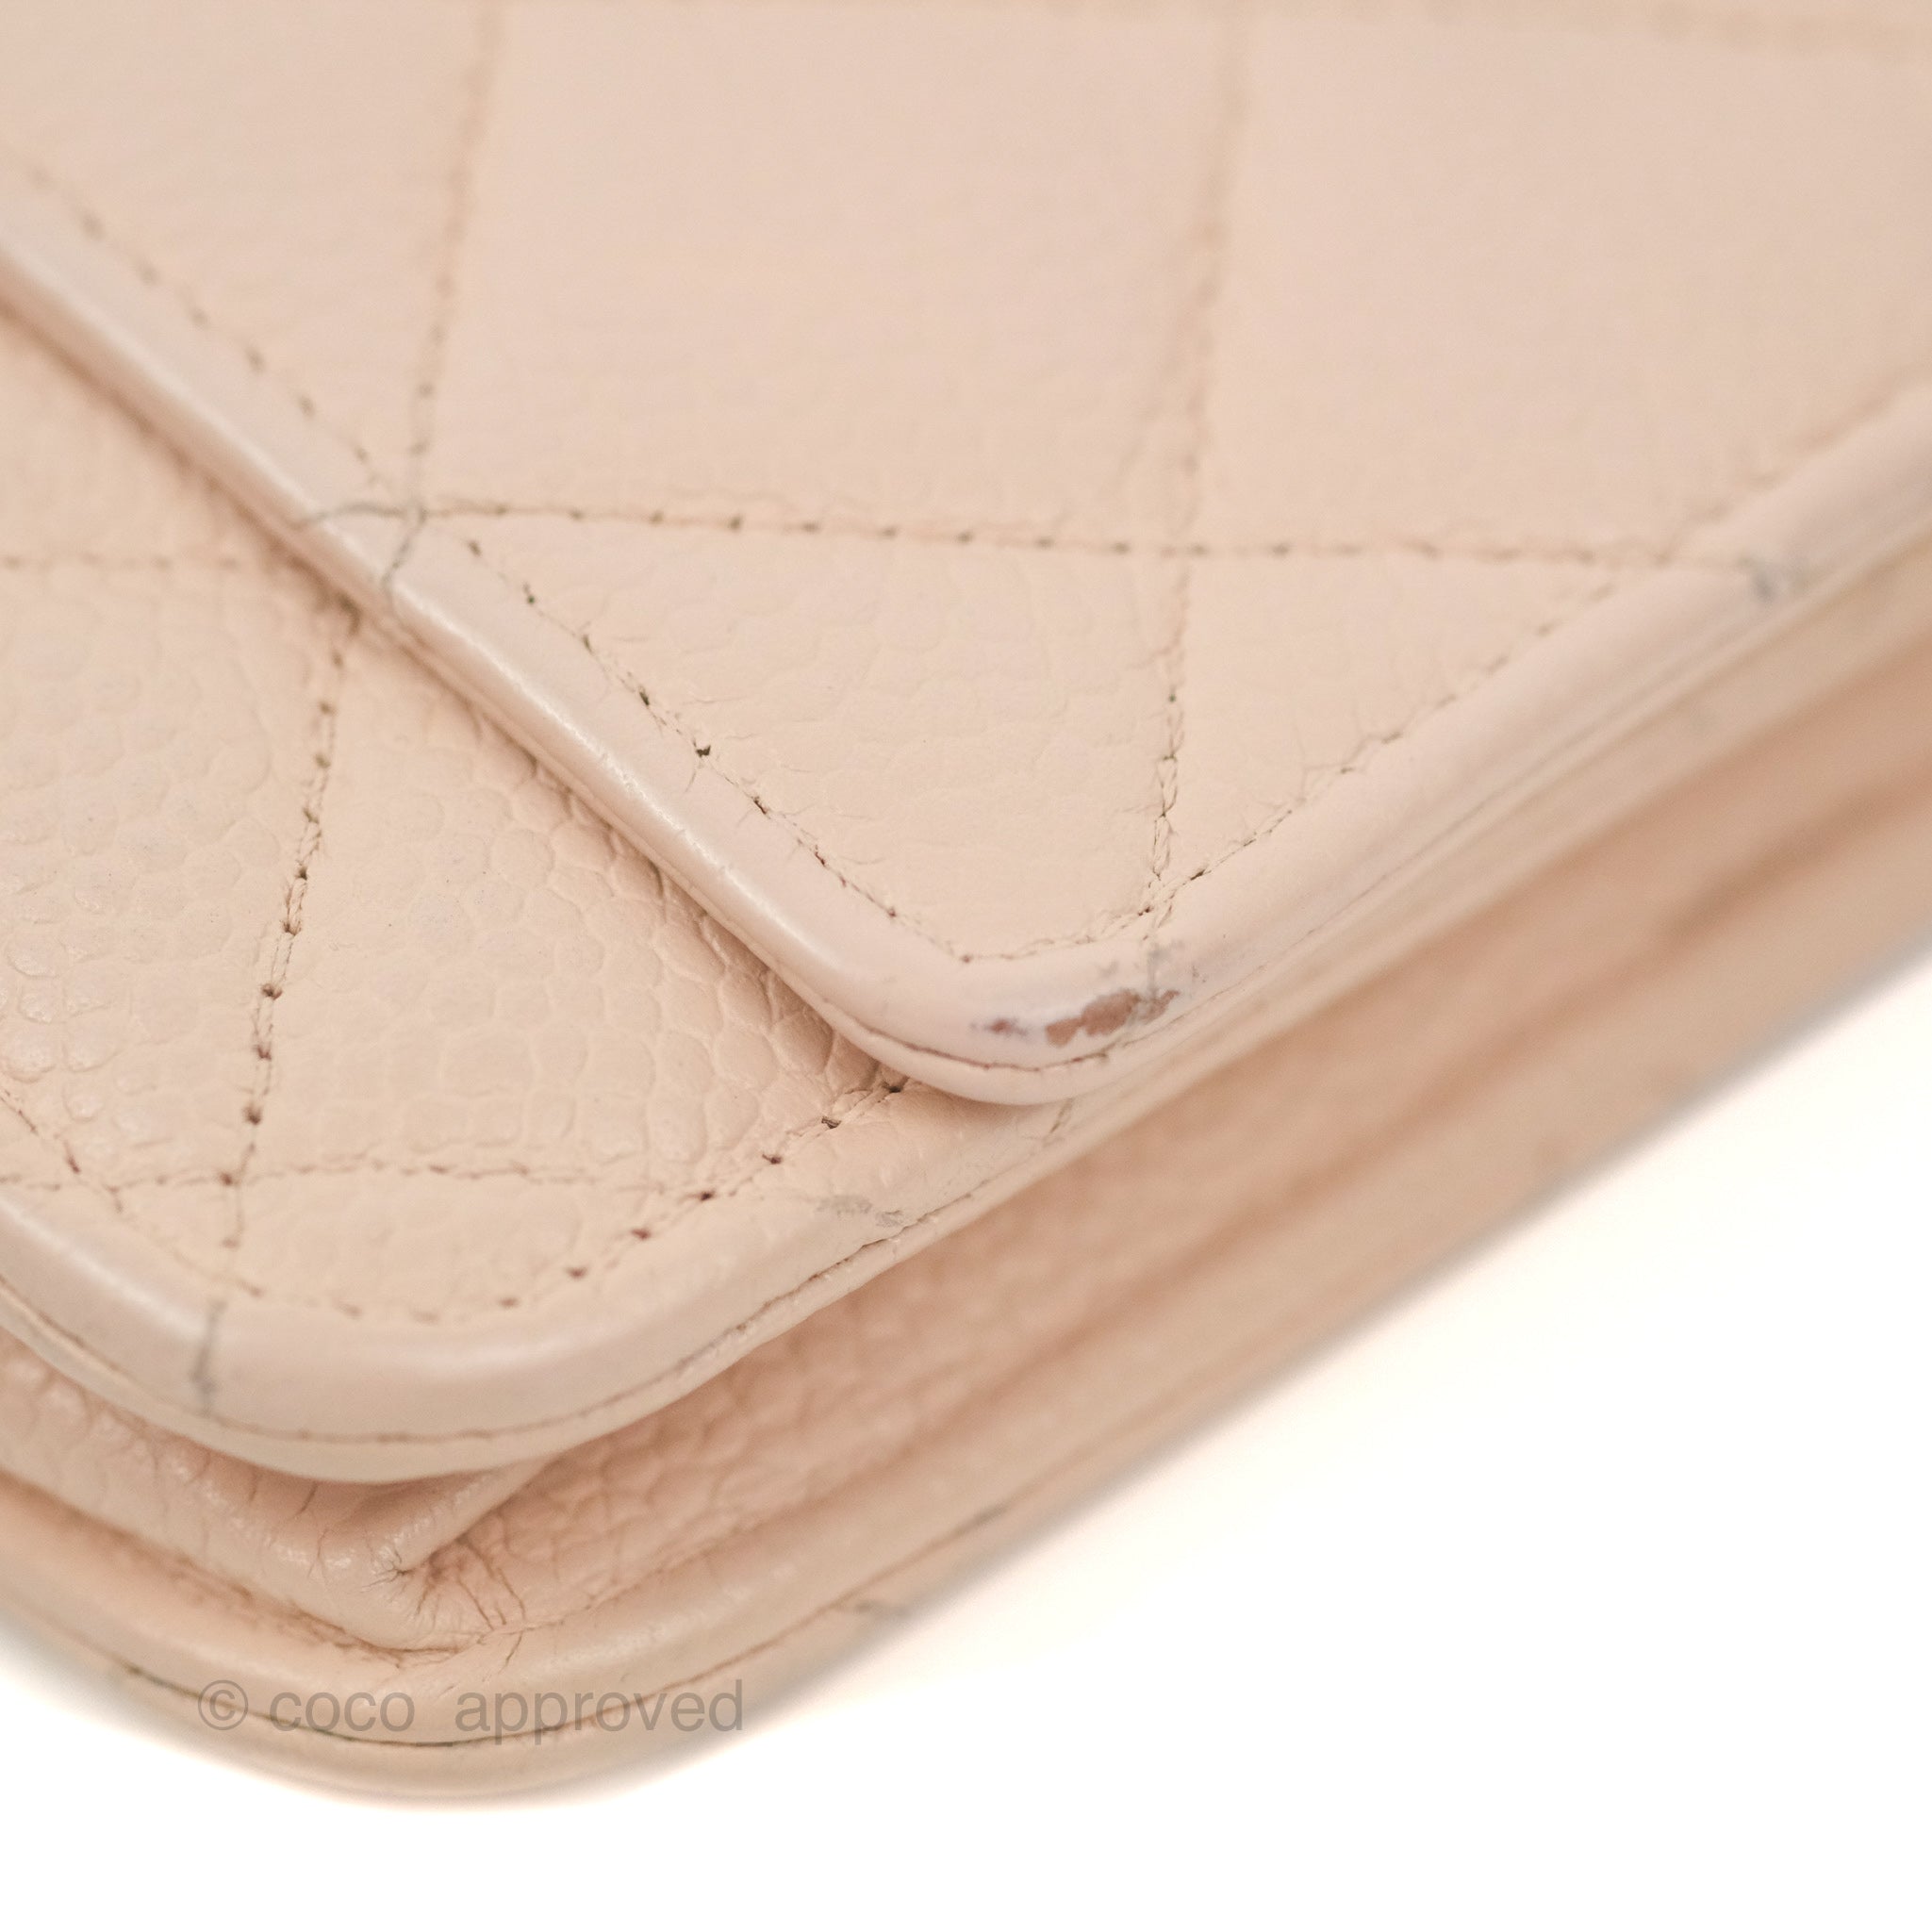 Chanel Quilted Classic Wallet on Chain WOC Pale Pink Caviar Silver Hardware